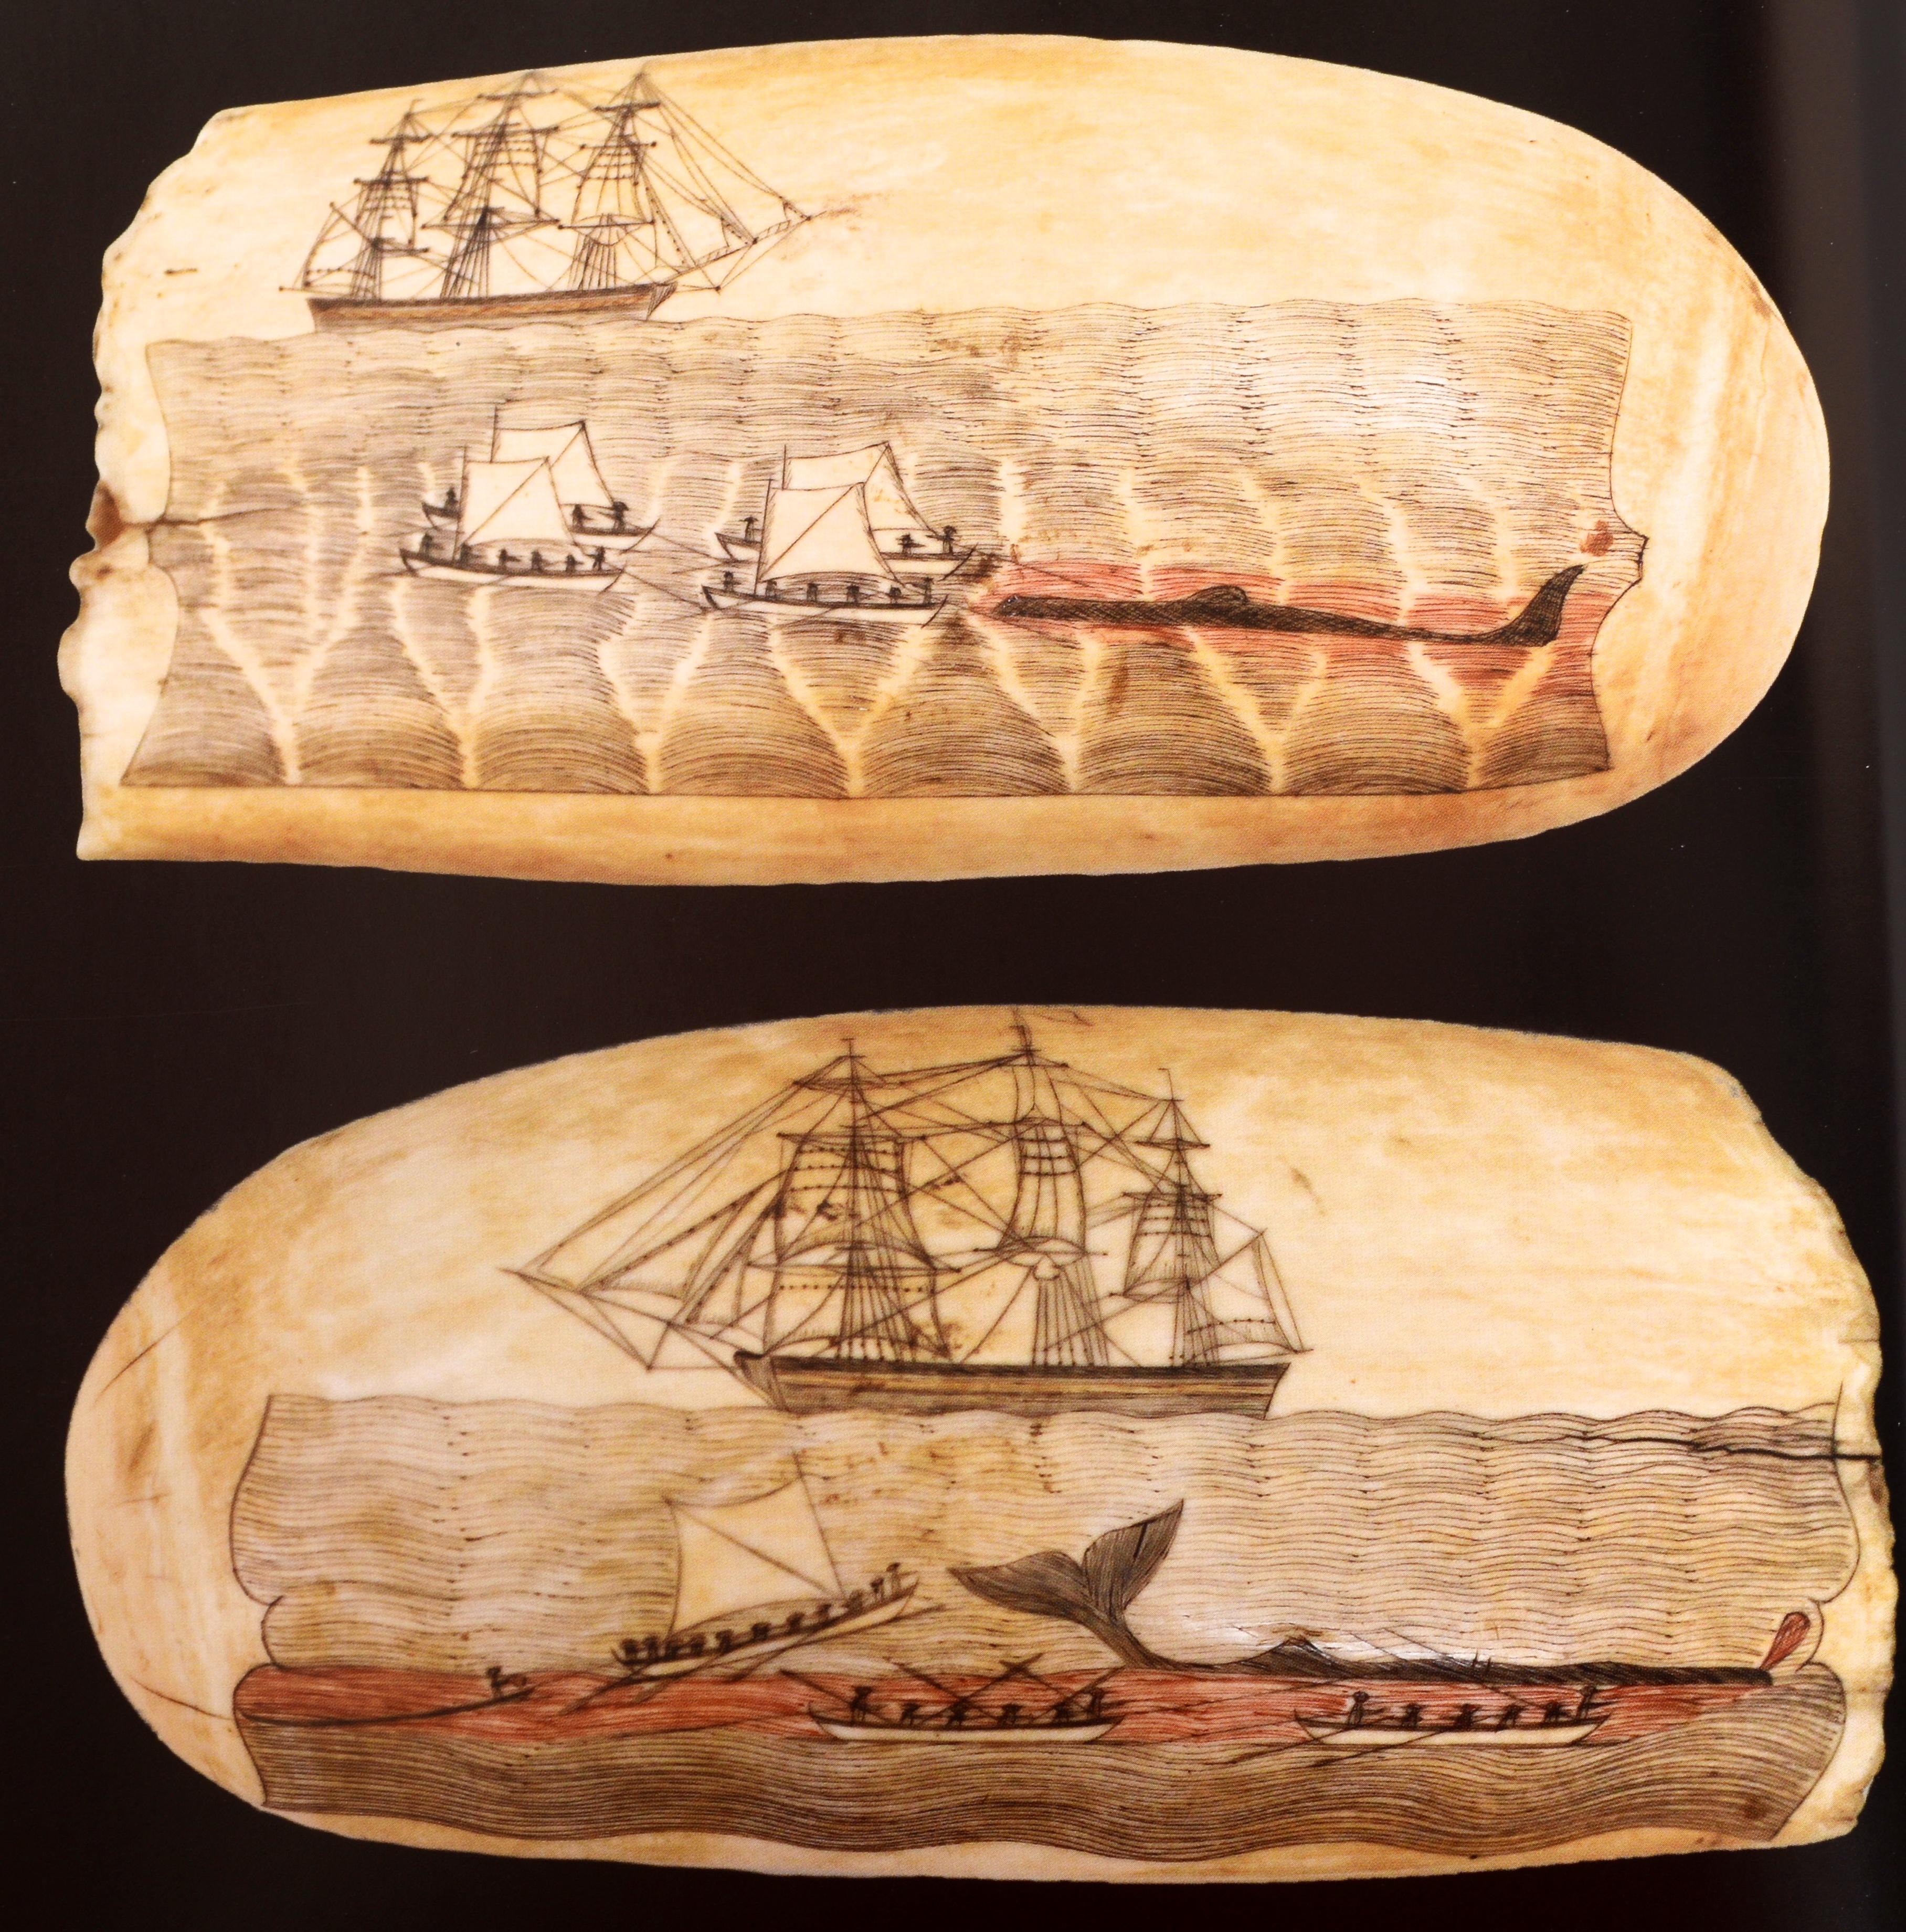 Ingenious Contrivances, Curiously Carved Scrimshaw, New Bedford Whaling Museum For Sale 4